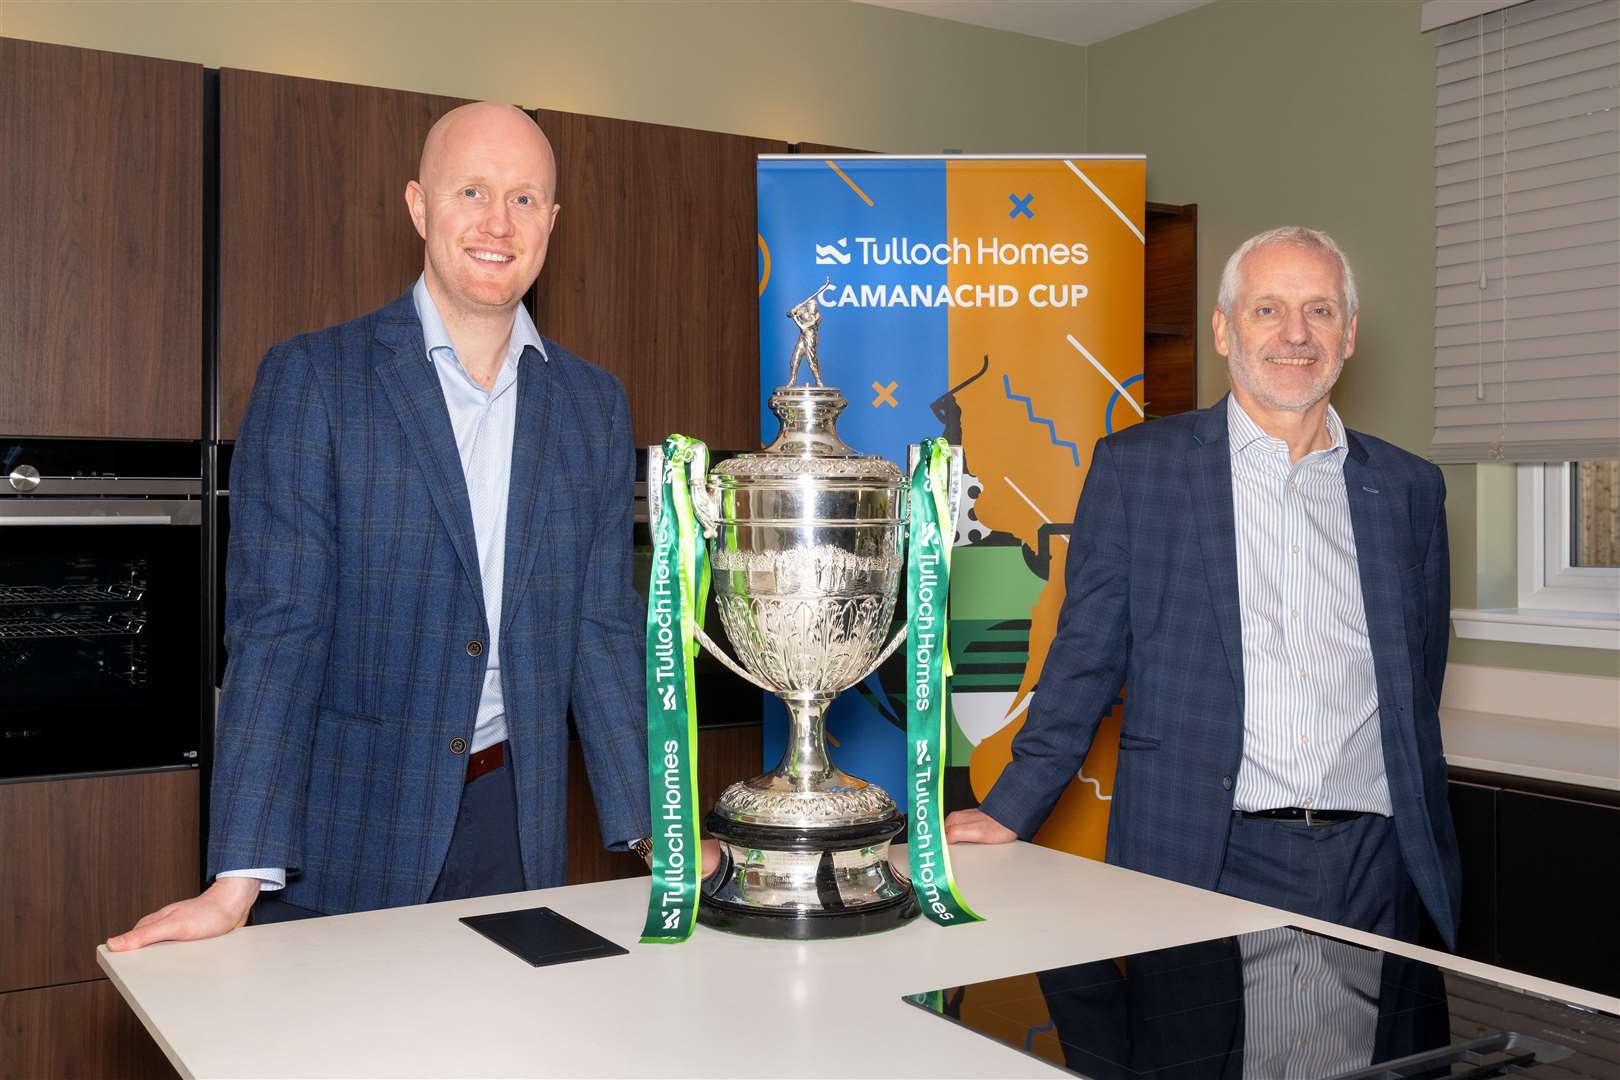 Kieran Graham, Tulloch Commercial Director and Sandy Grant, Tulloch Homes Managing Director with the Tulloch Homes Camanachd Cup